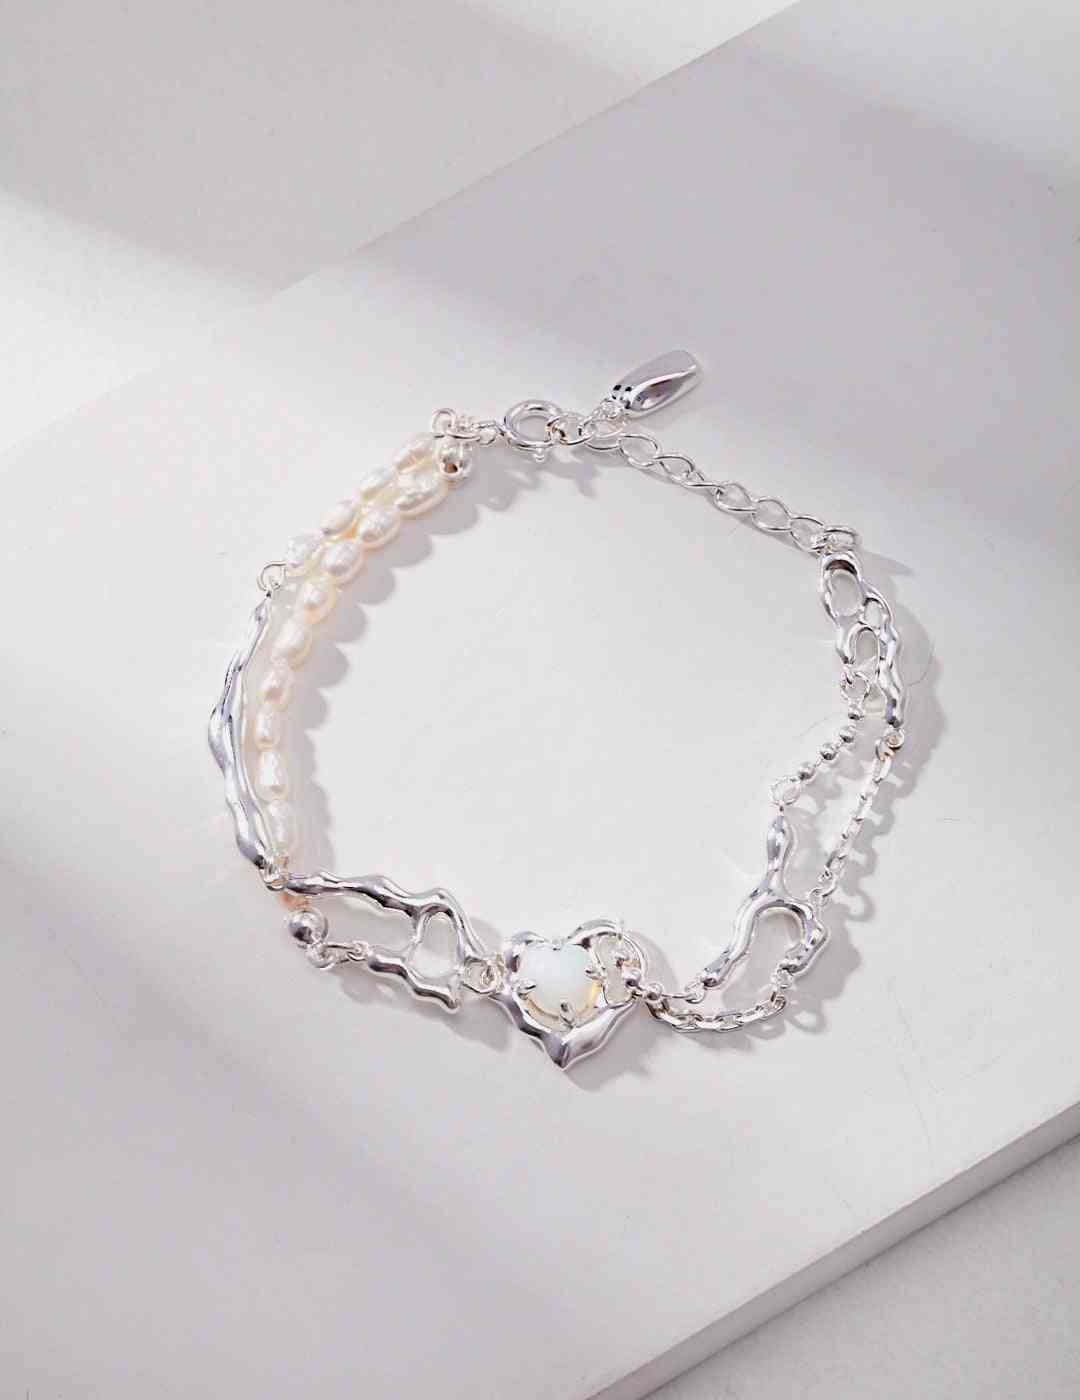 a silver bracelet with pearls and a opal stone